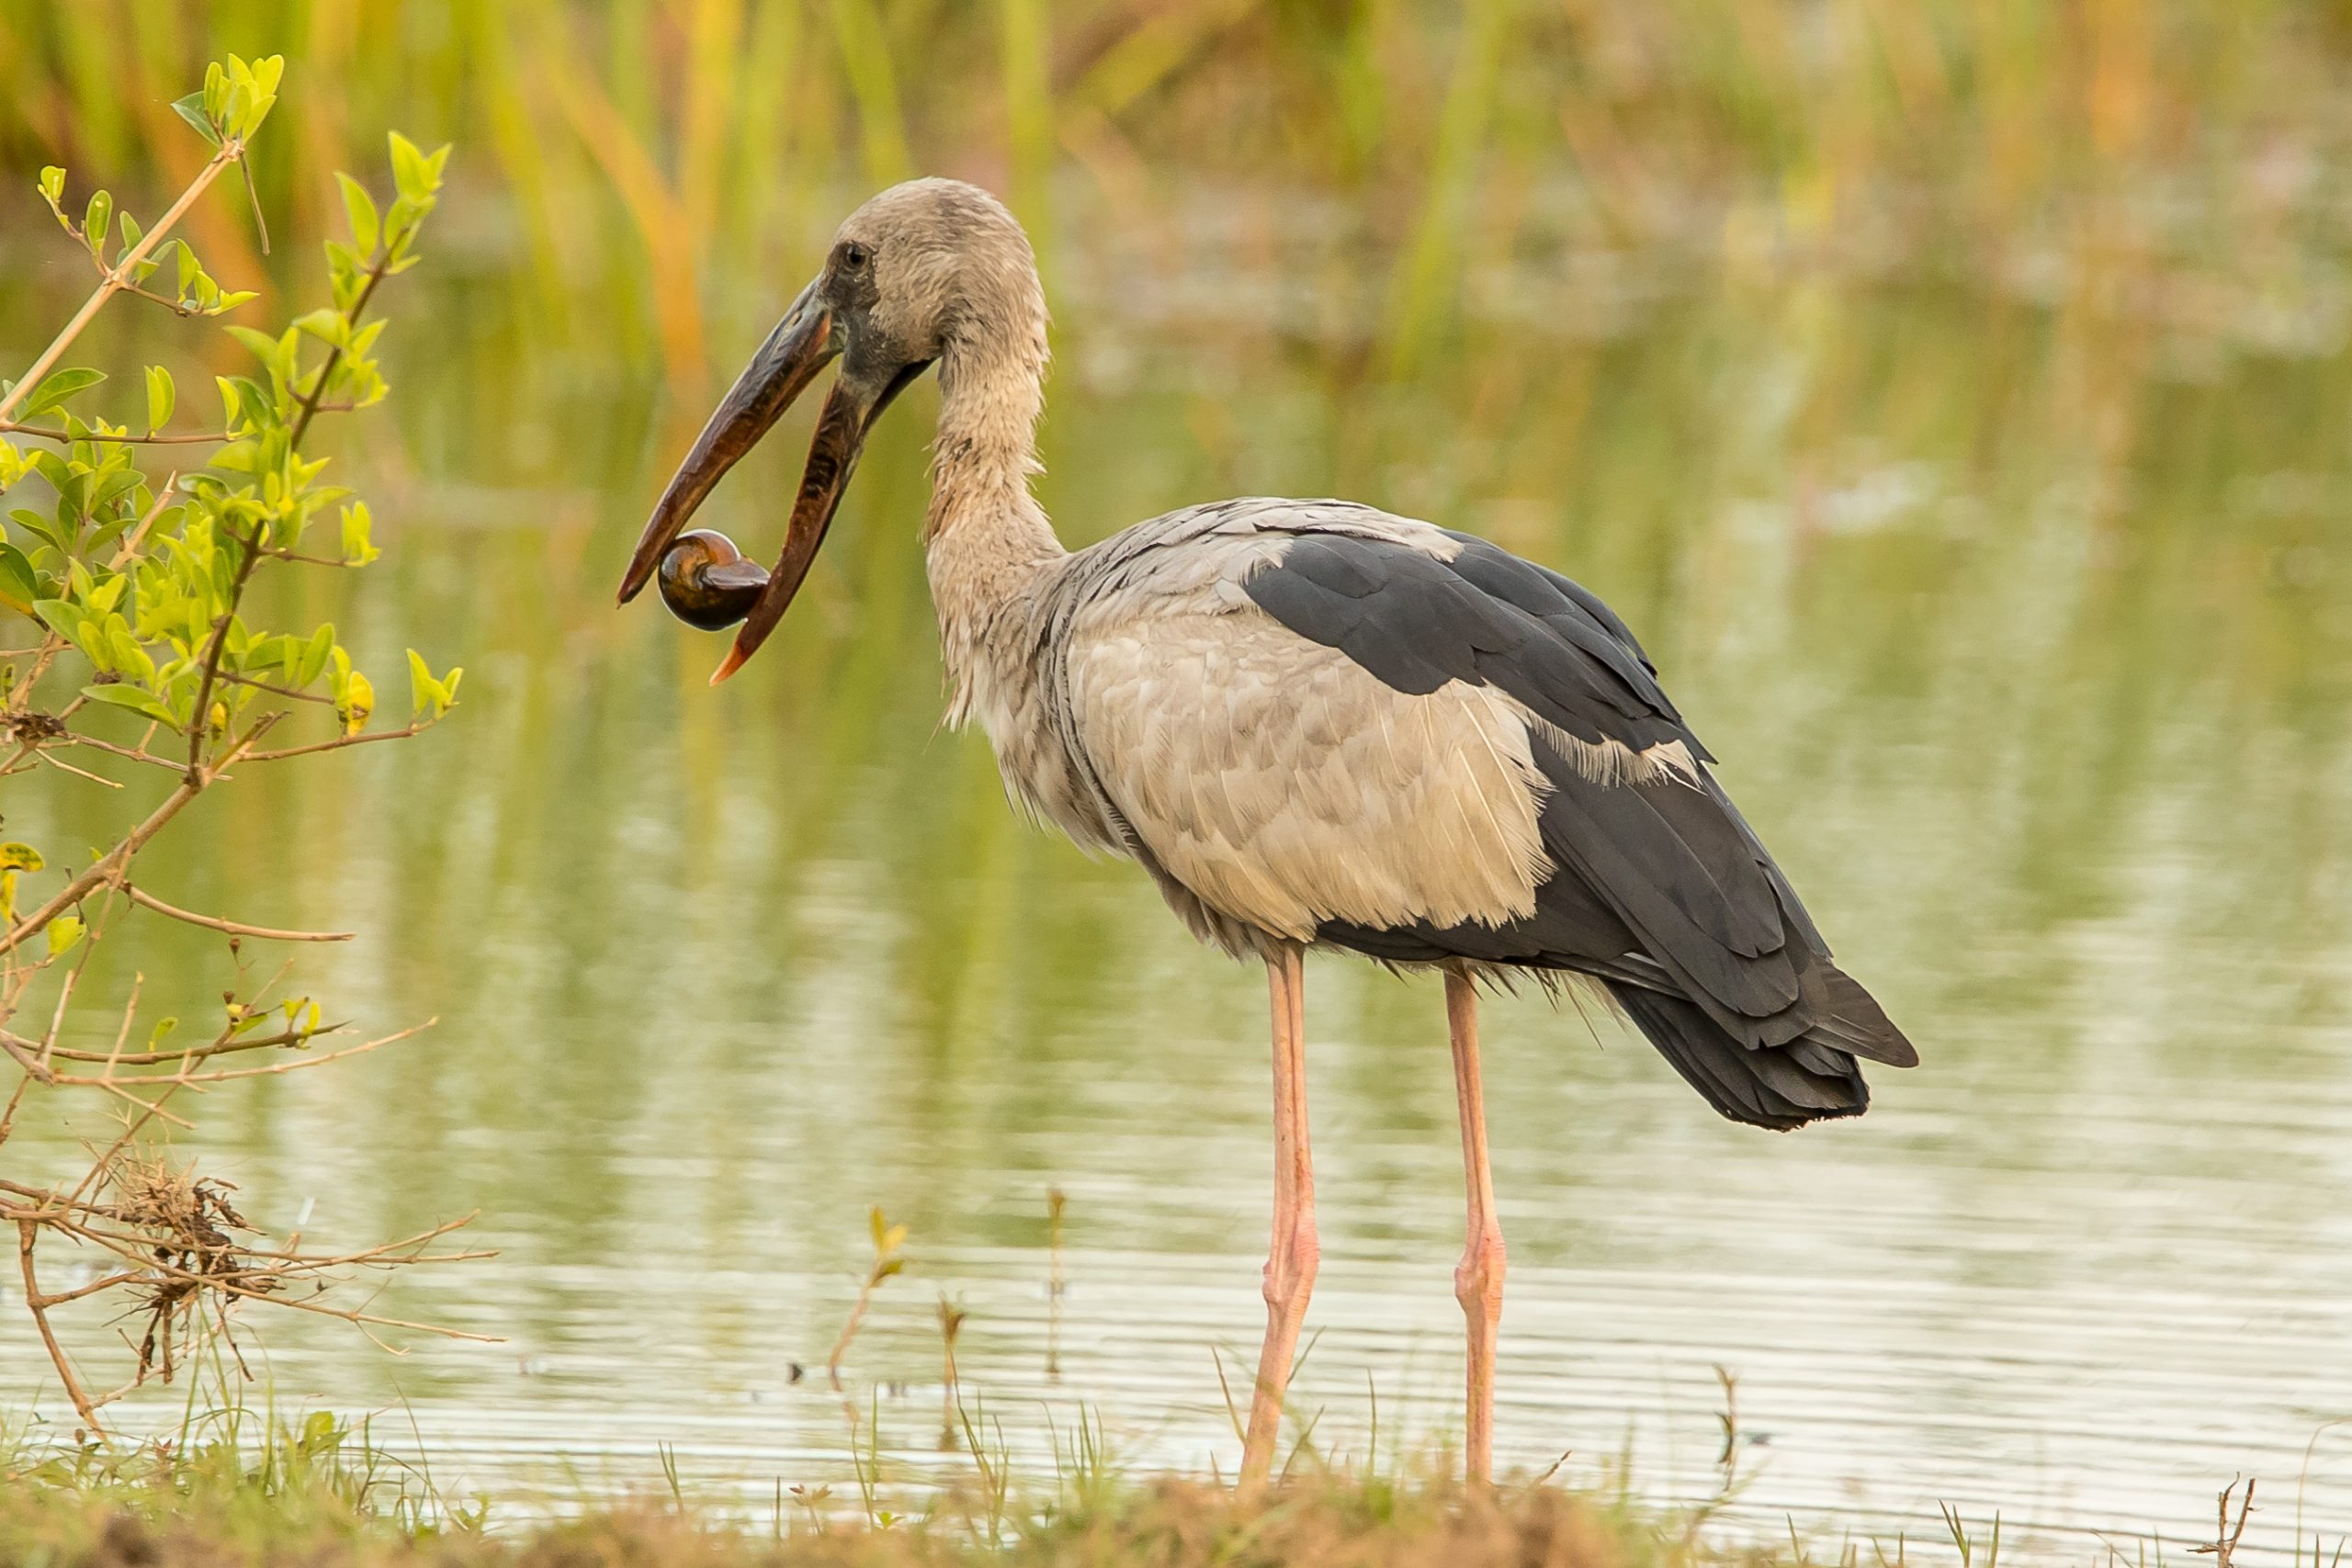 Asian Openbill was among 163 birds spotted by the Restorasi Ekosistem Riau (RER) team during the annual Asian Waterbird Census (AWC) 2021 in the Kampar Peninsula.